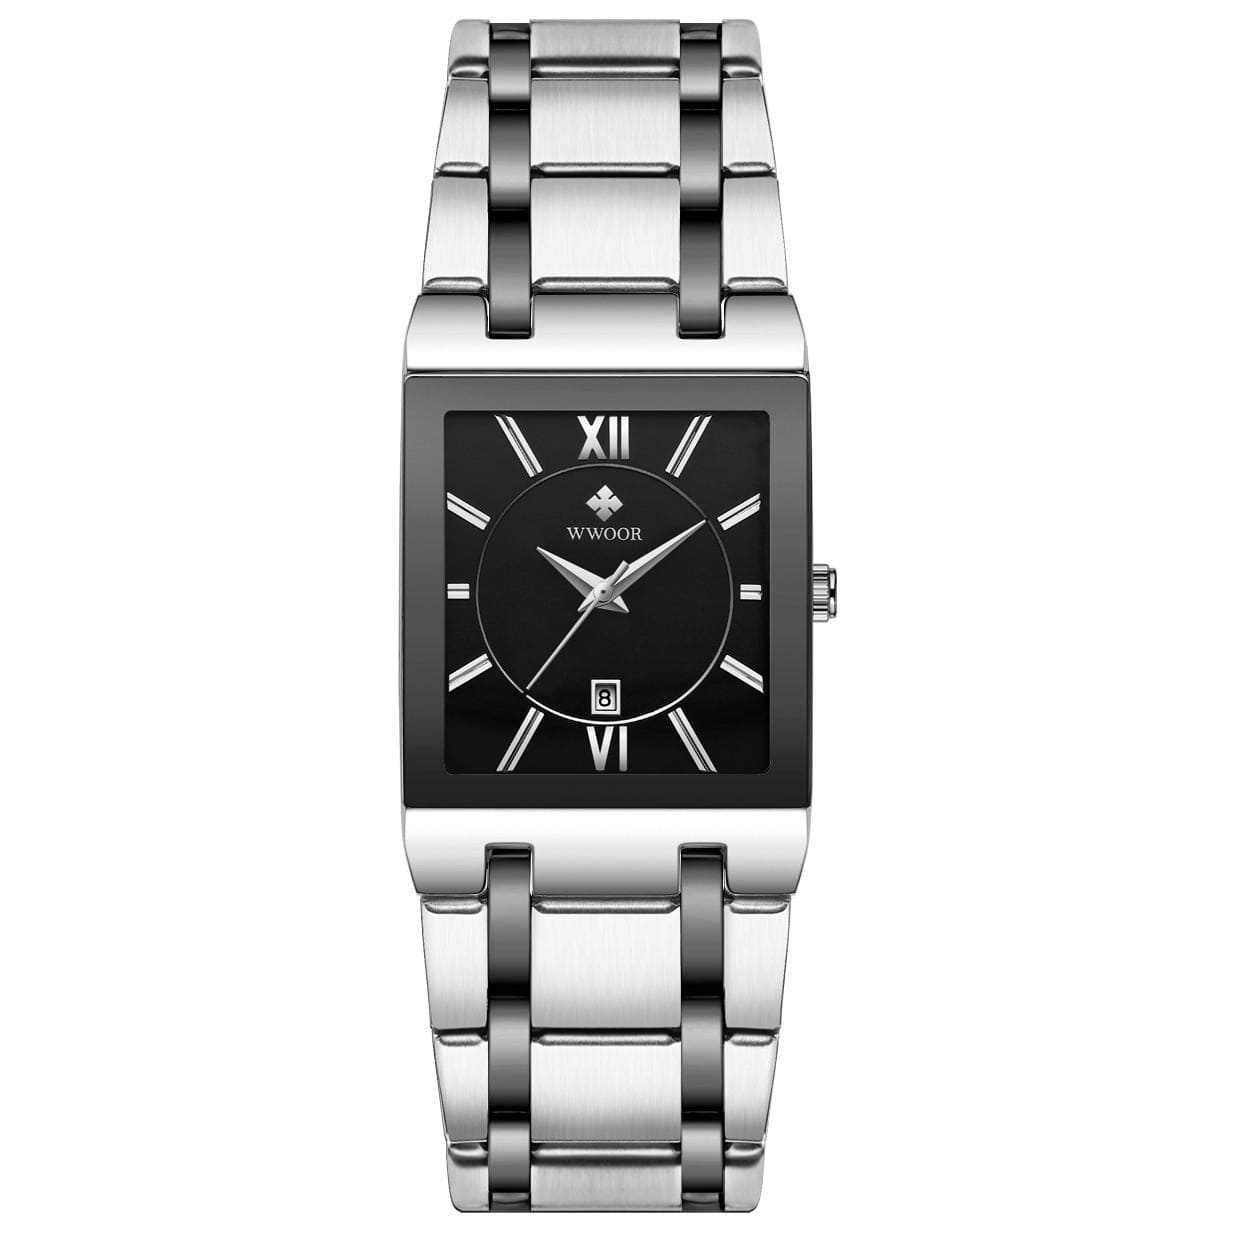 Watch - Men's Fully Automatic Square Steel Band Waterproof Quartz Watch